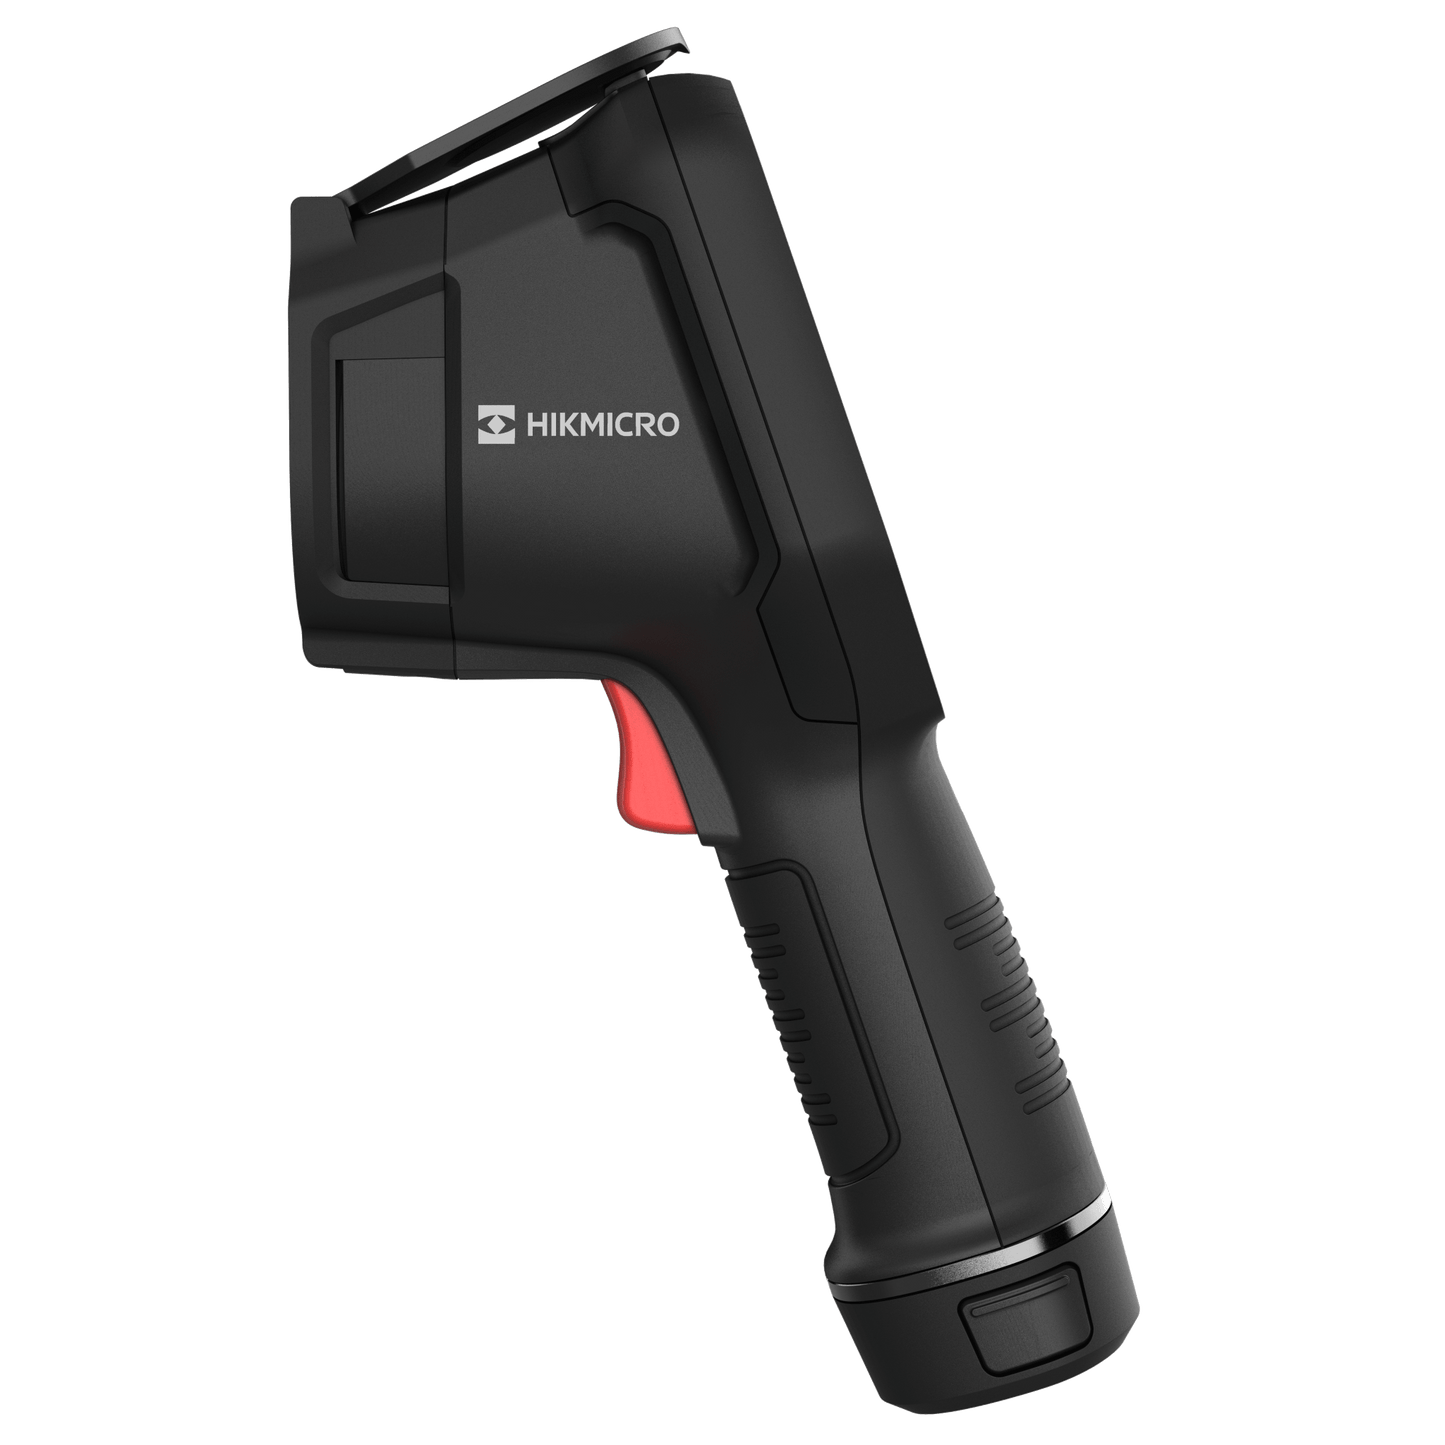 HikMicro M11W Handheld Thermography Camera Side view on a transparent background